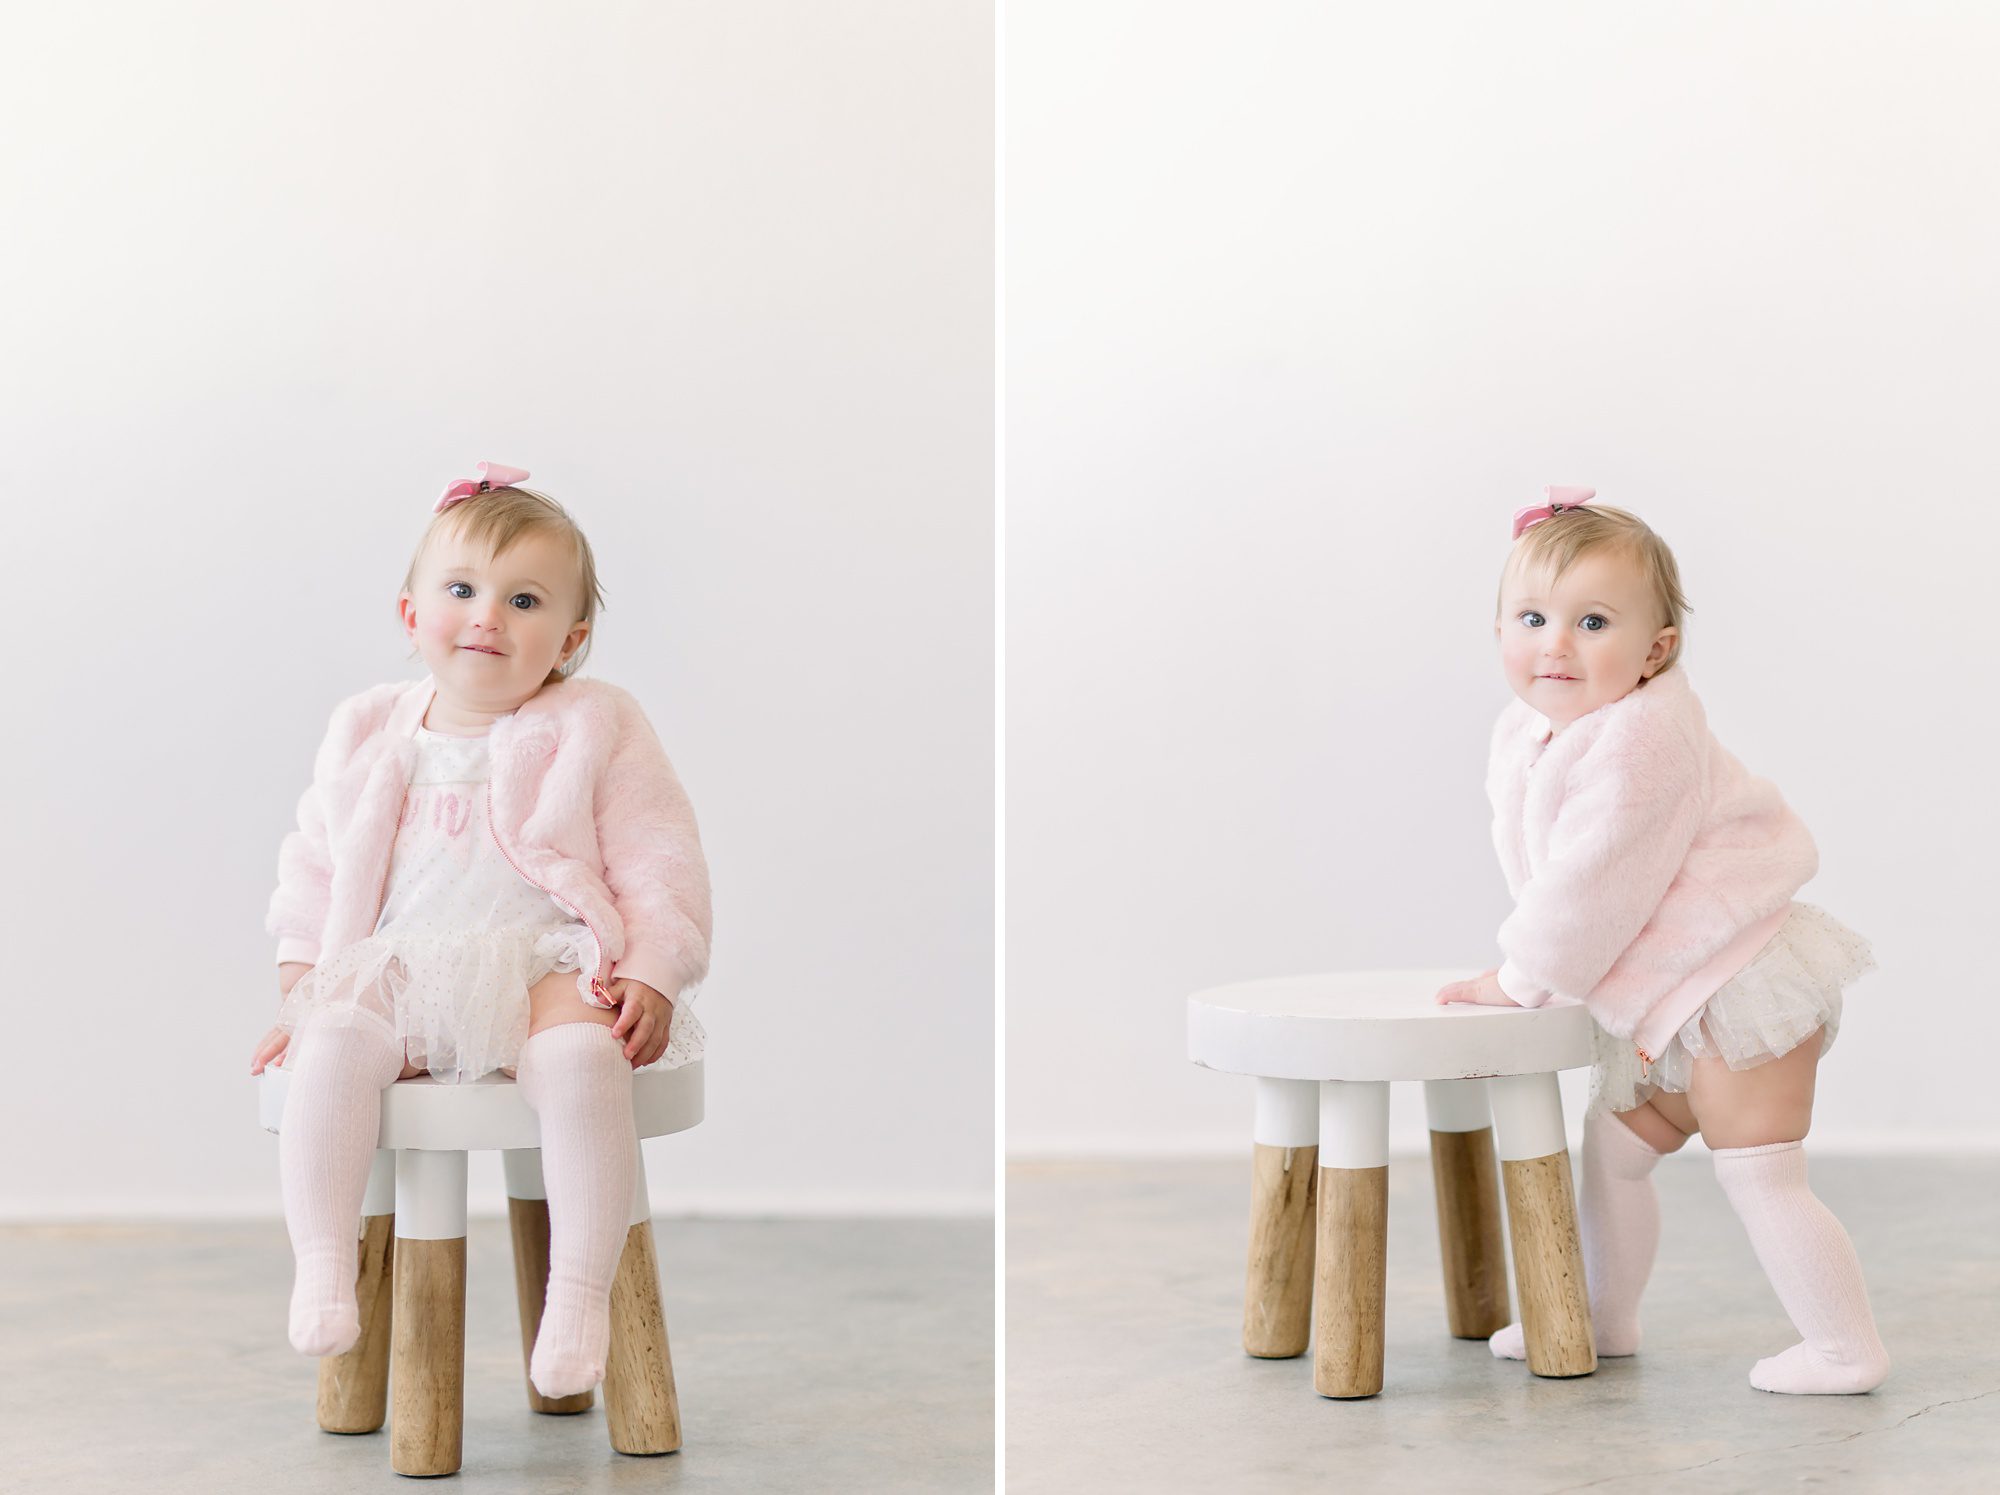 A sweet blonde baby girl gets 1st birthday photos done in a bright white studio, including portraits and a cake smash.